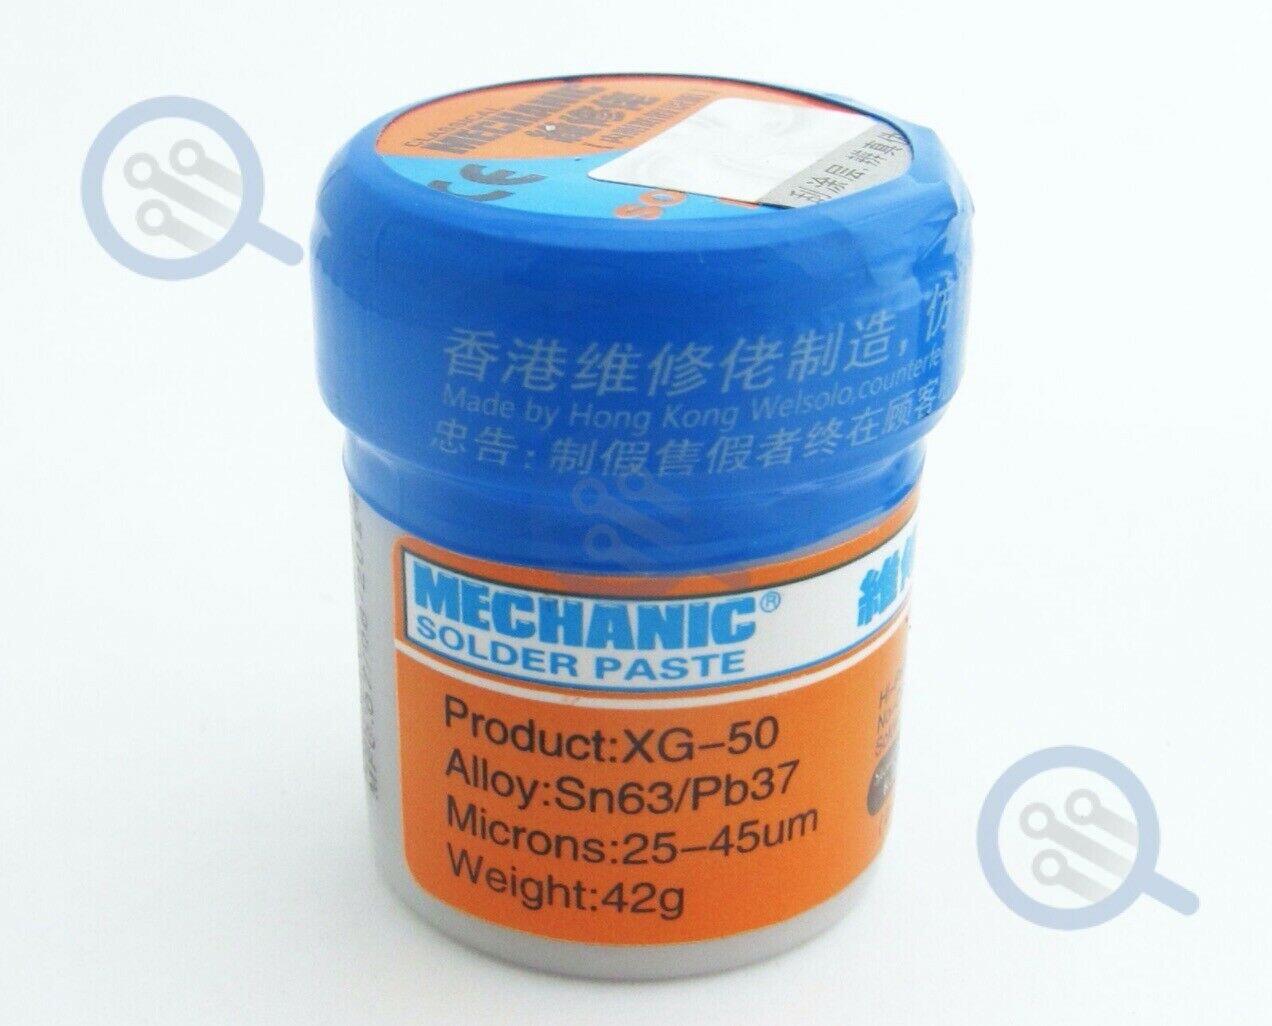 This is the solder paste that we use for all of our reballing. It melts at 183°C. It comes in a 42g plastic container. One container should last you a long time.